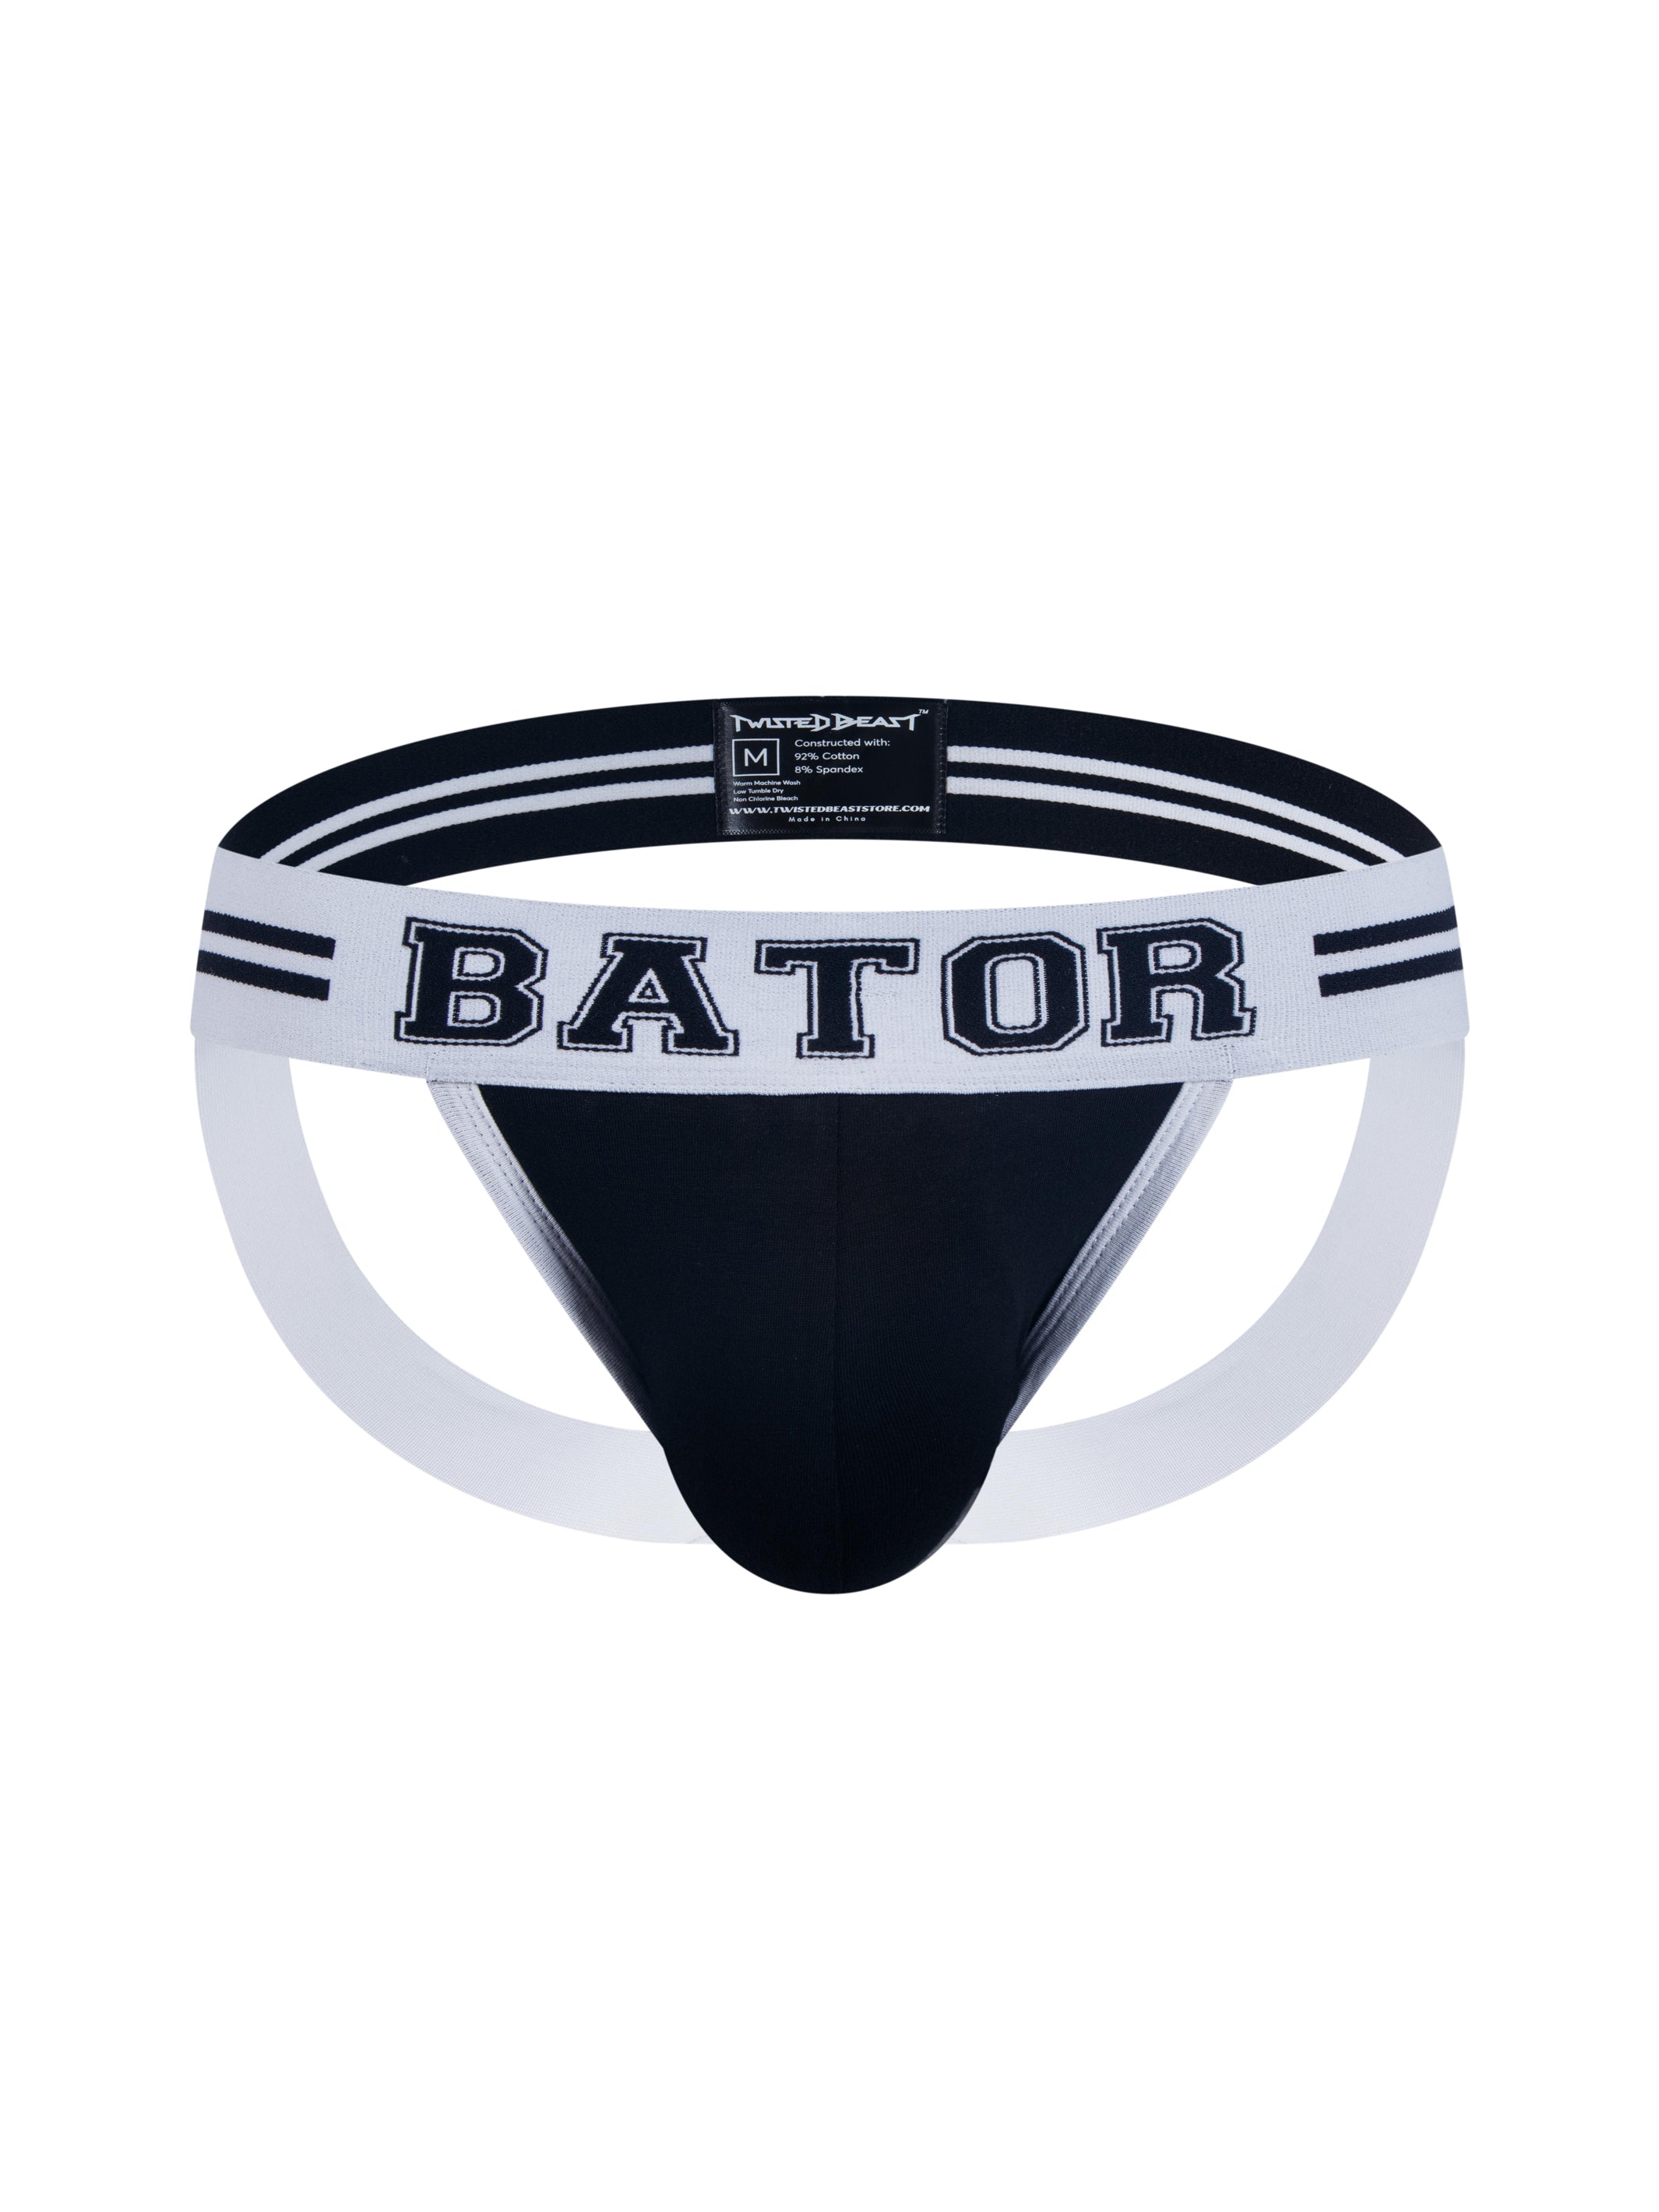 A product photo of a black Bator Jock taken from the front.